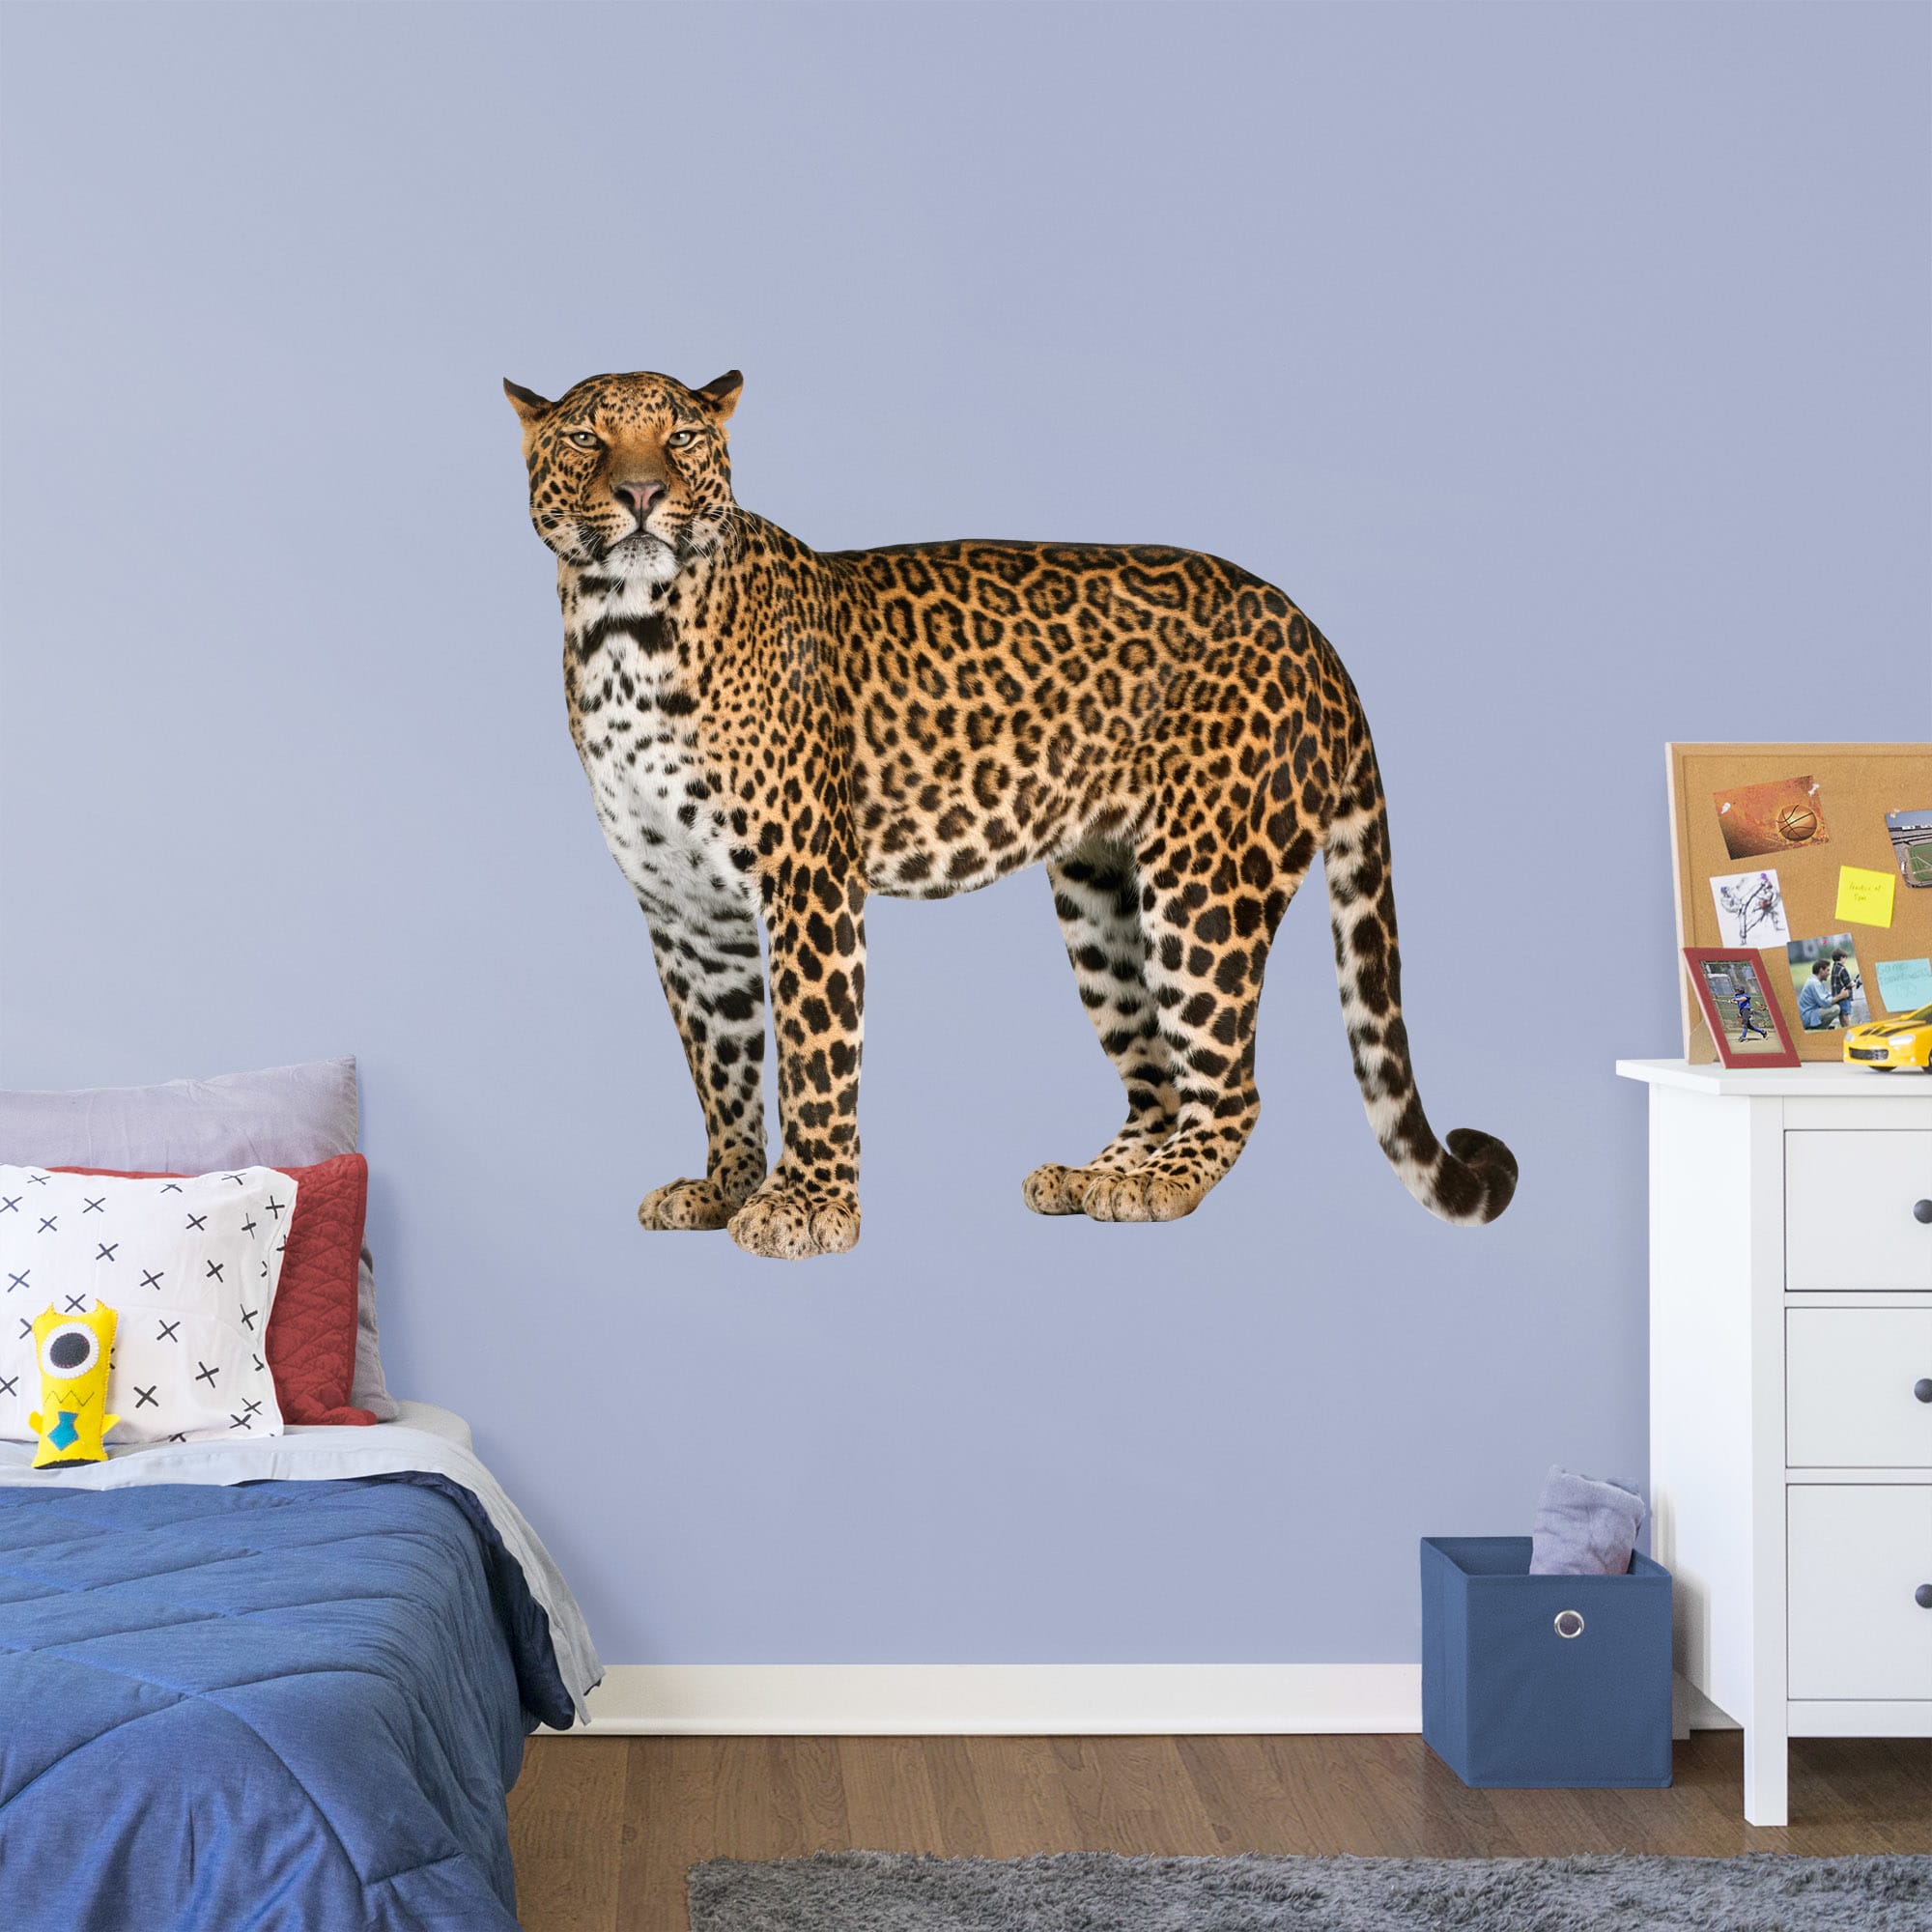 Jaguar - Removable Vinyl Decal Life-Size Animal + 2 Decals (58"W x 51"H) by Fathead